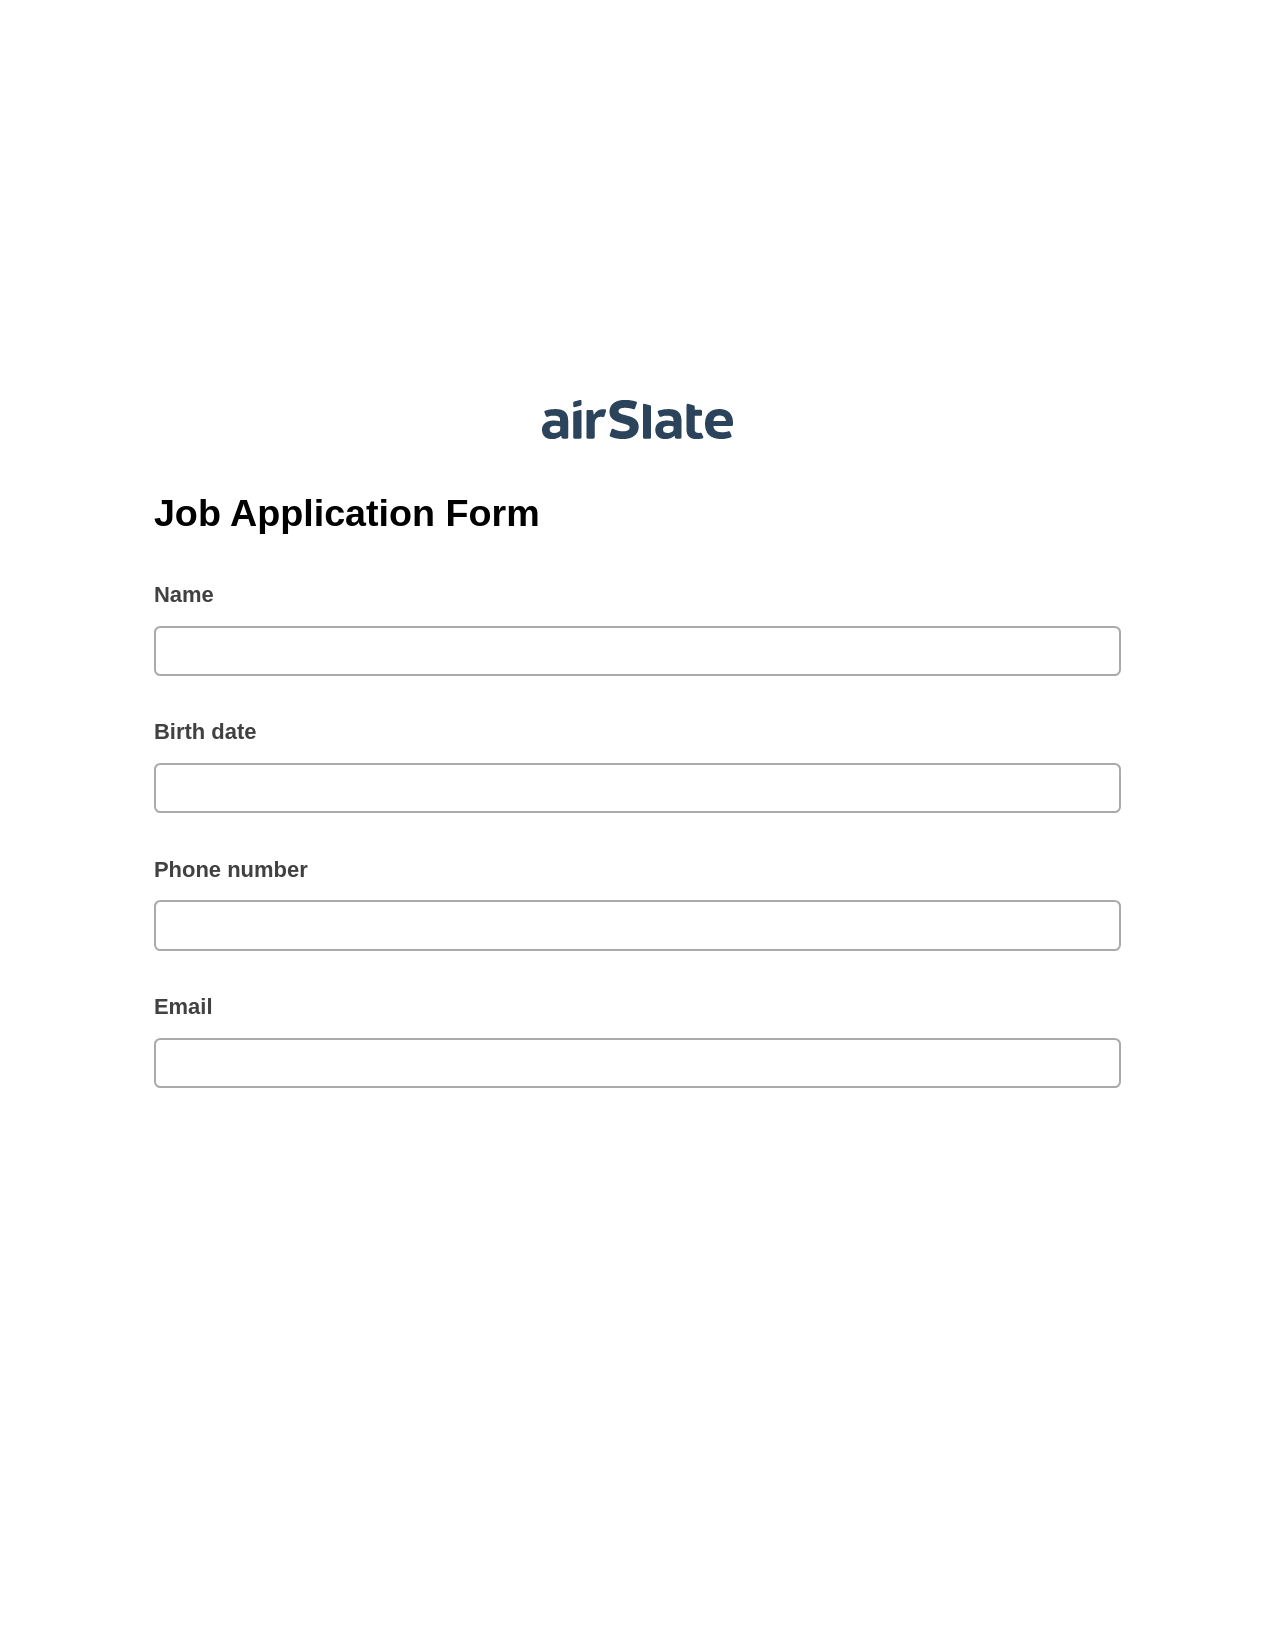 Job Application Form Pre-fill from Google Sheets Bot, Create slate addon, Archive to SharePoint Folder Bot